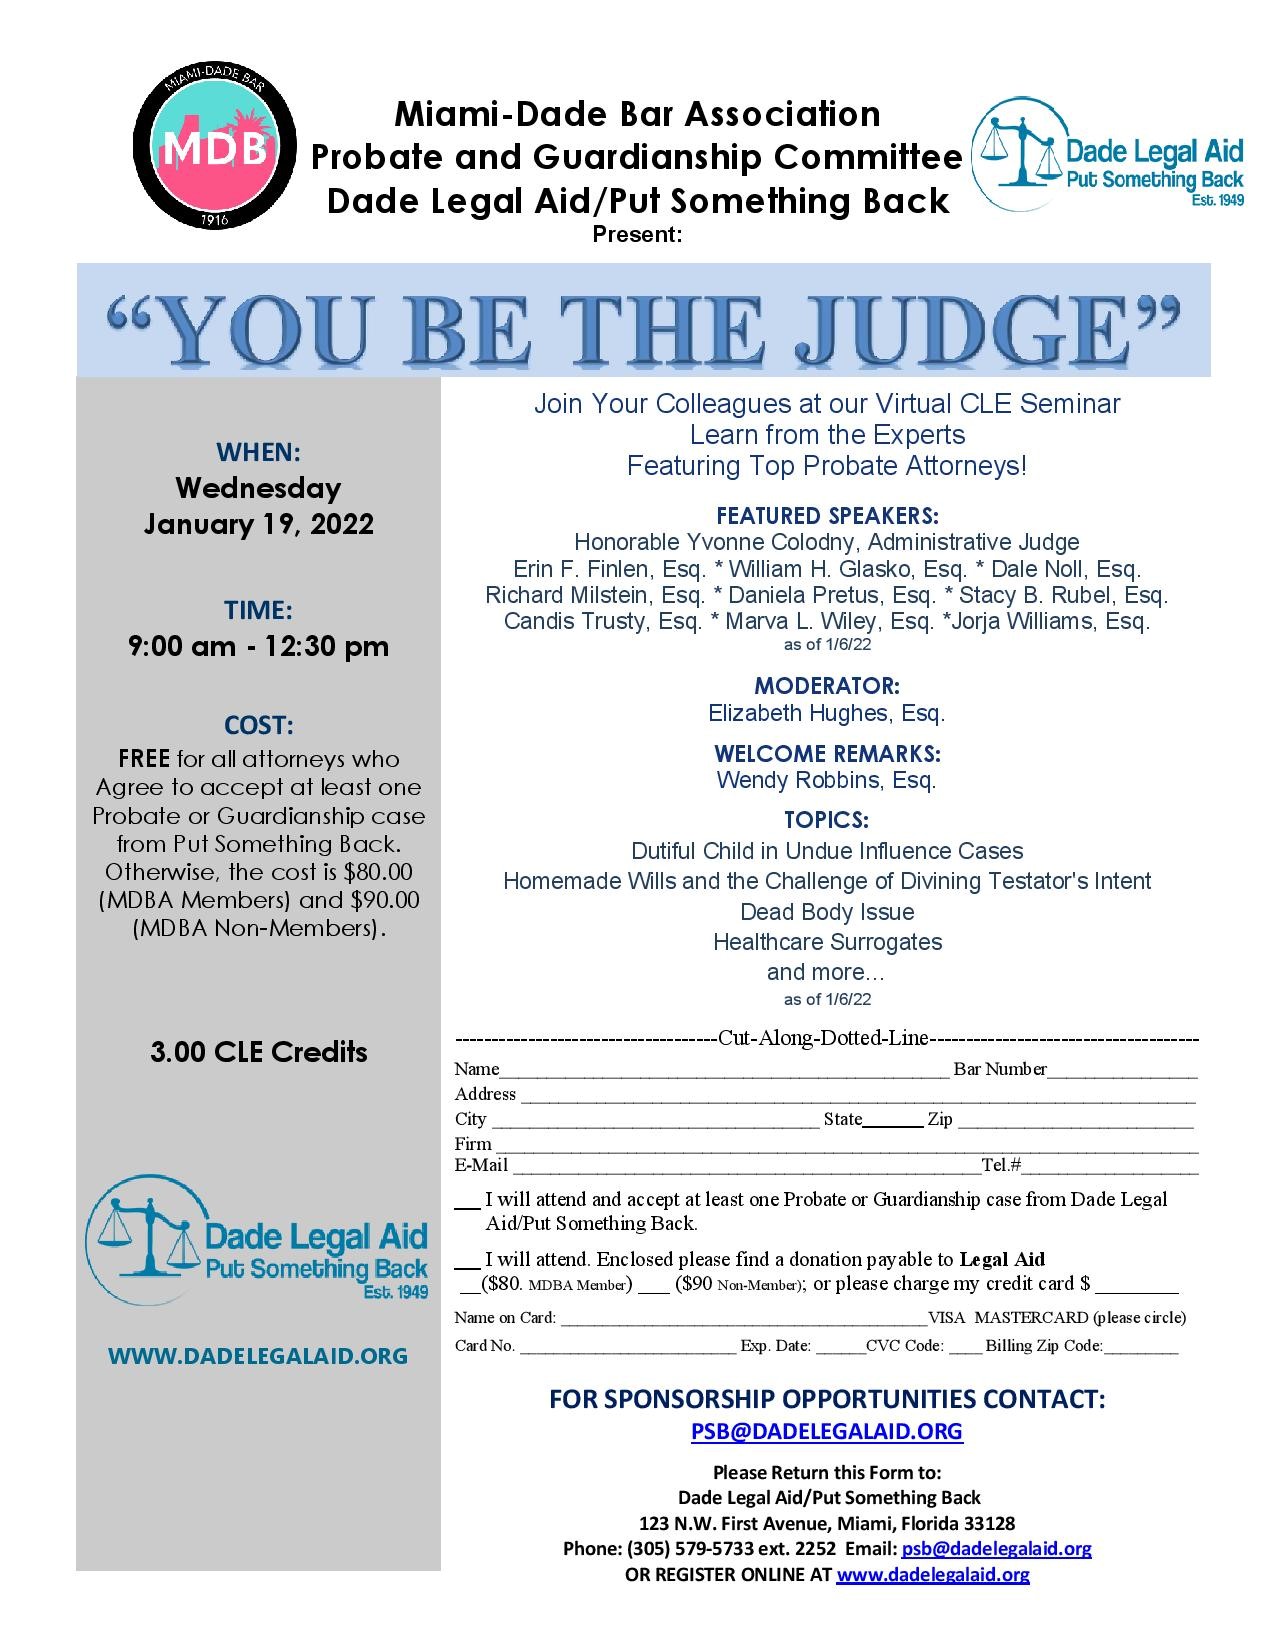 you-be-the-judge-probate-seminar-january-19-2022-flyer-dade-legal-aid